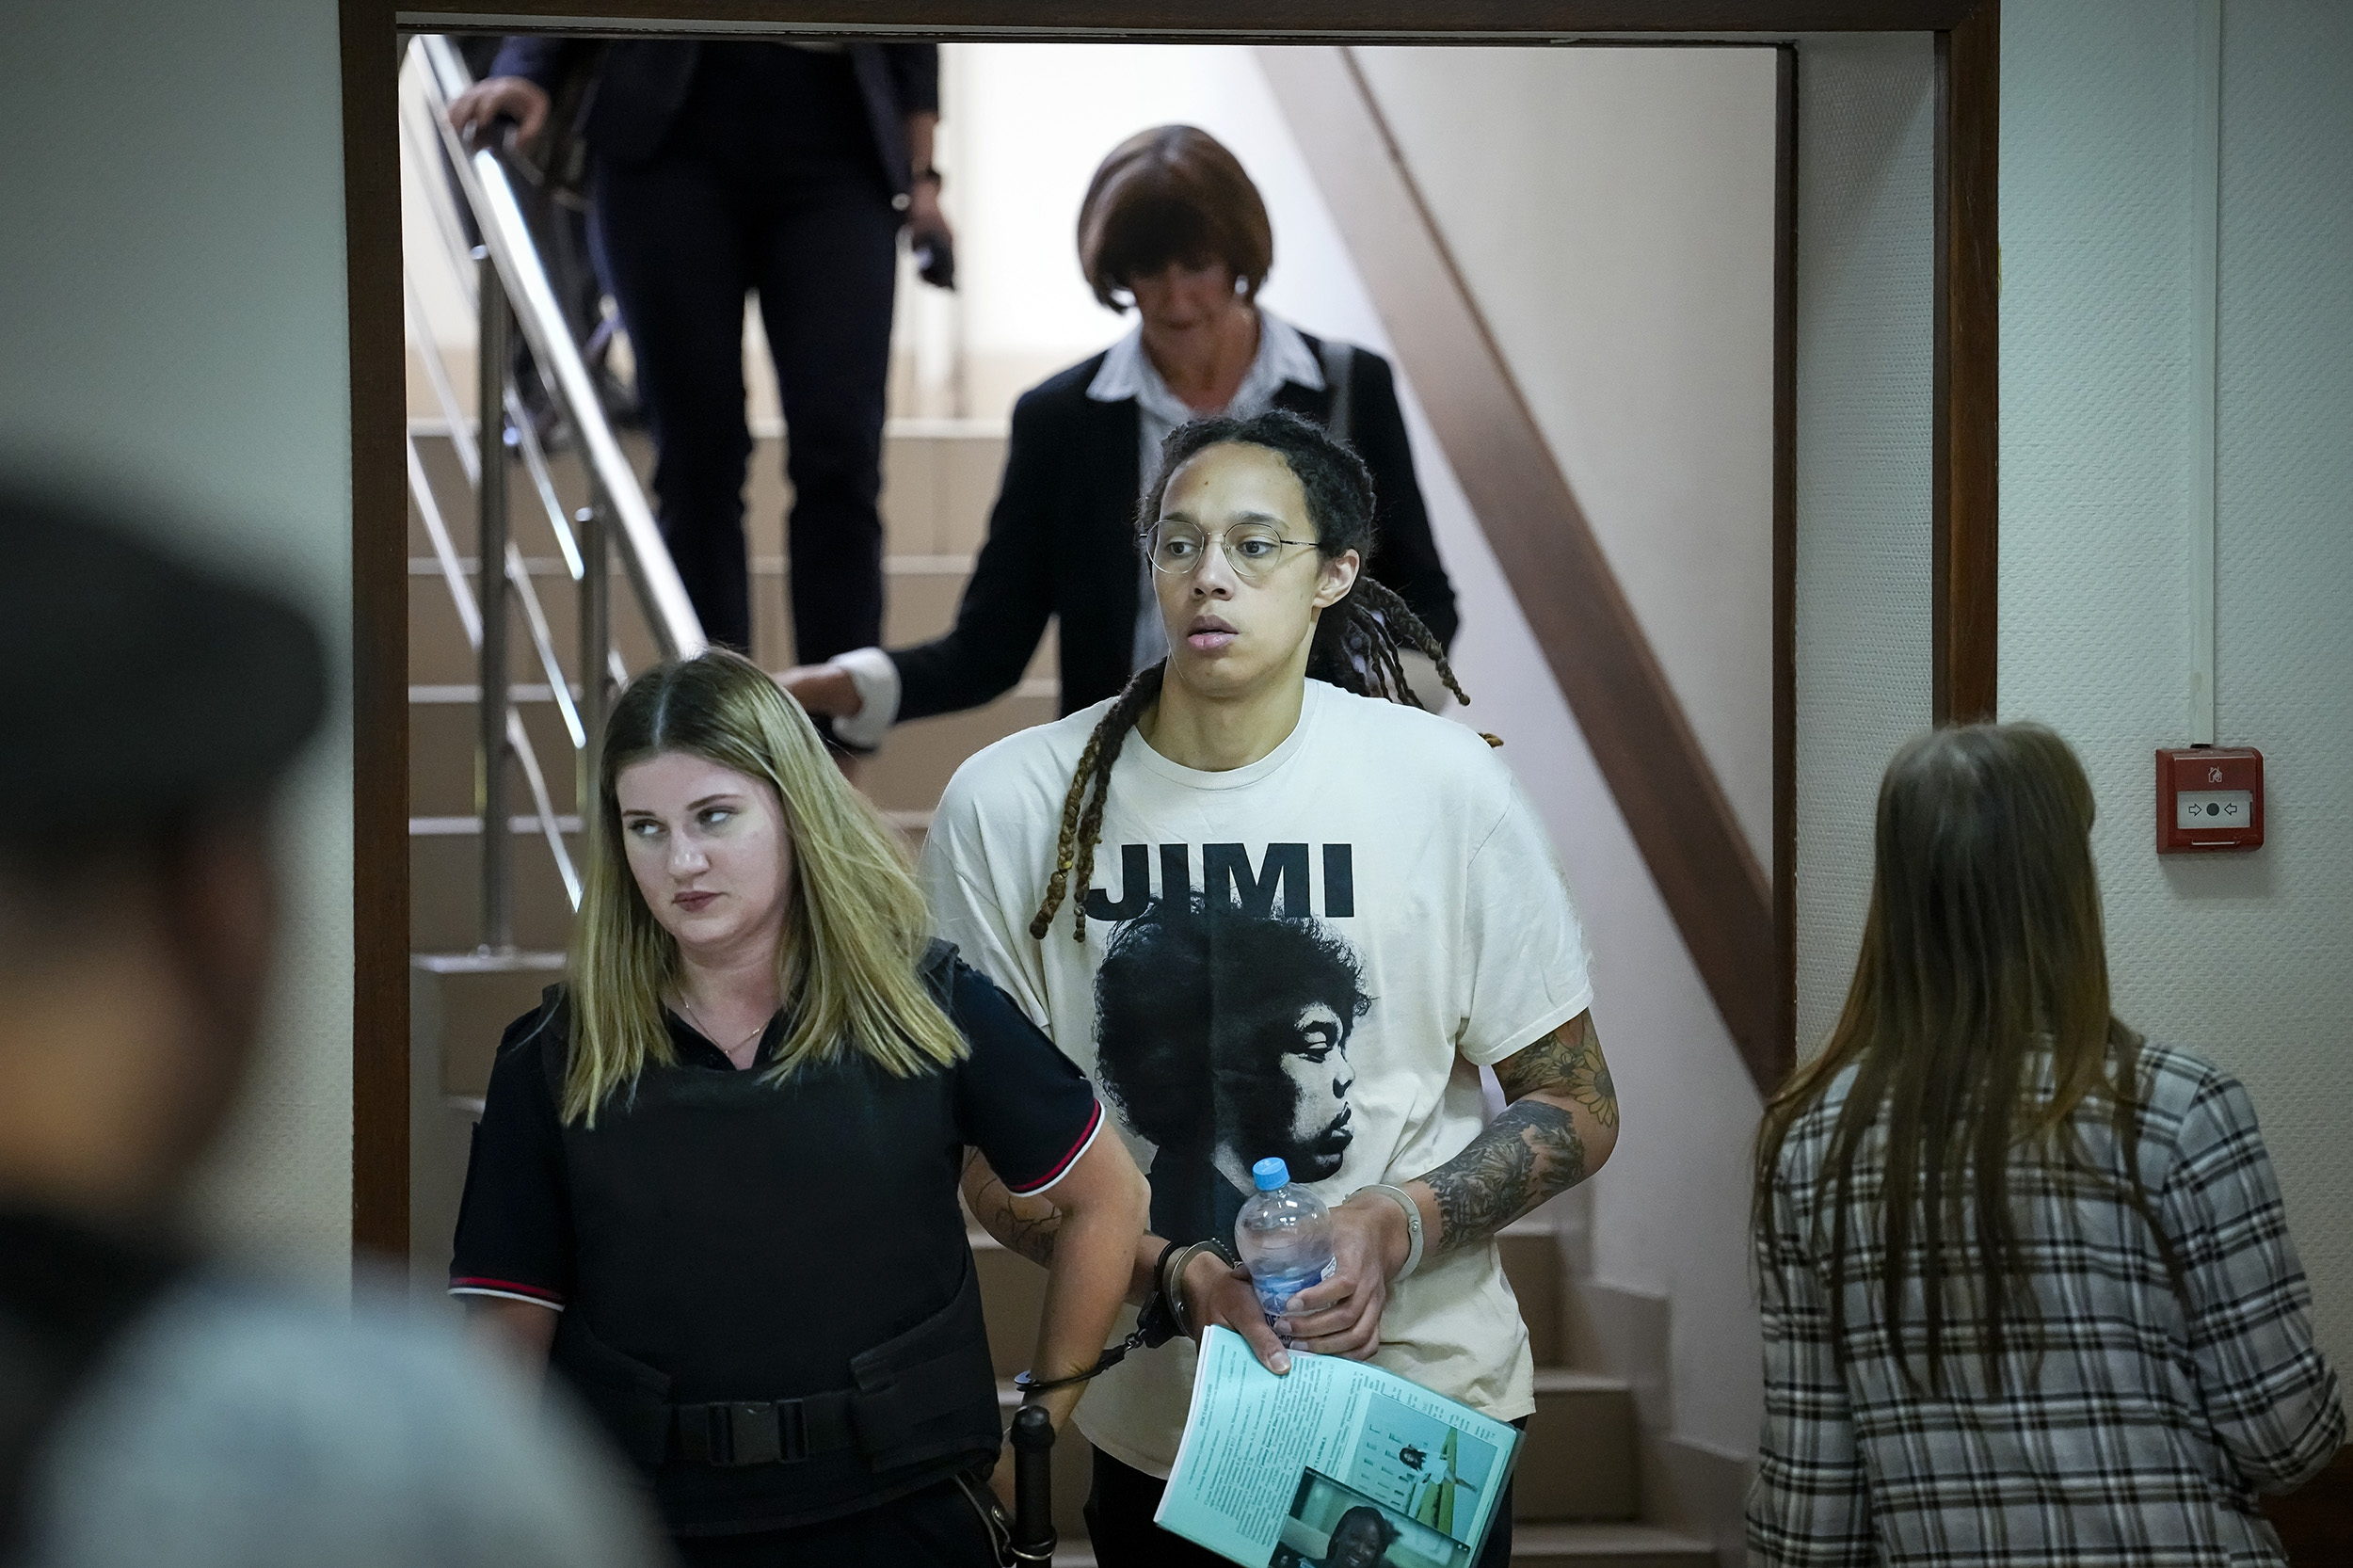 WNBA star and two-time Olympic gold medalist Brittney Griner, center, is escorted to a courtroom for a hearing, in Khimki just outside Moscow, Russia, on July 1.